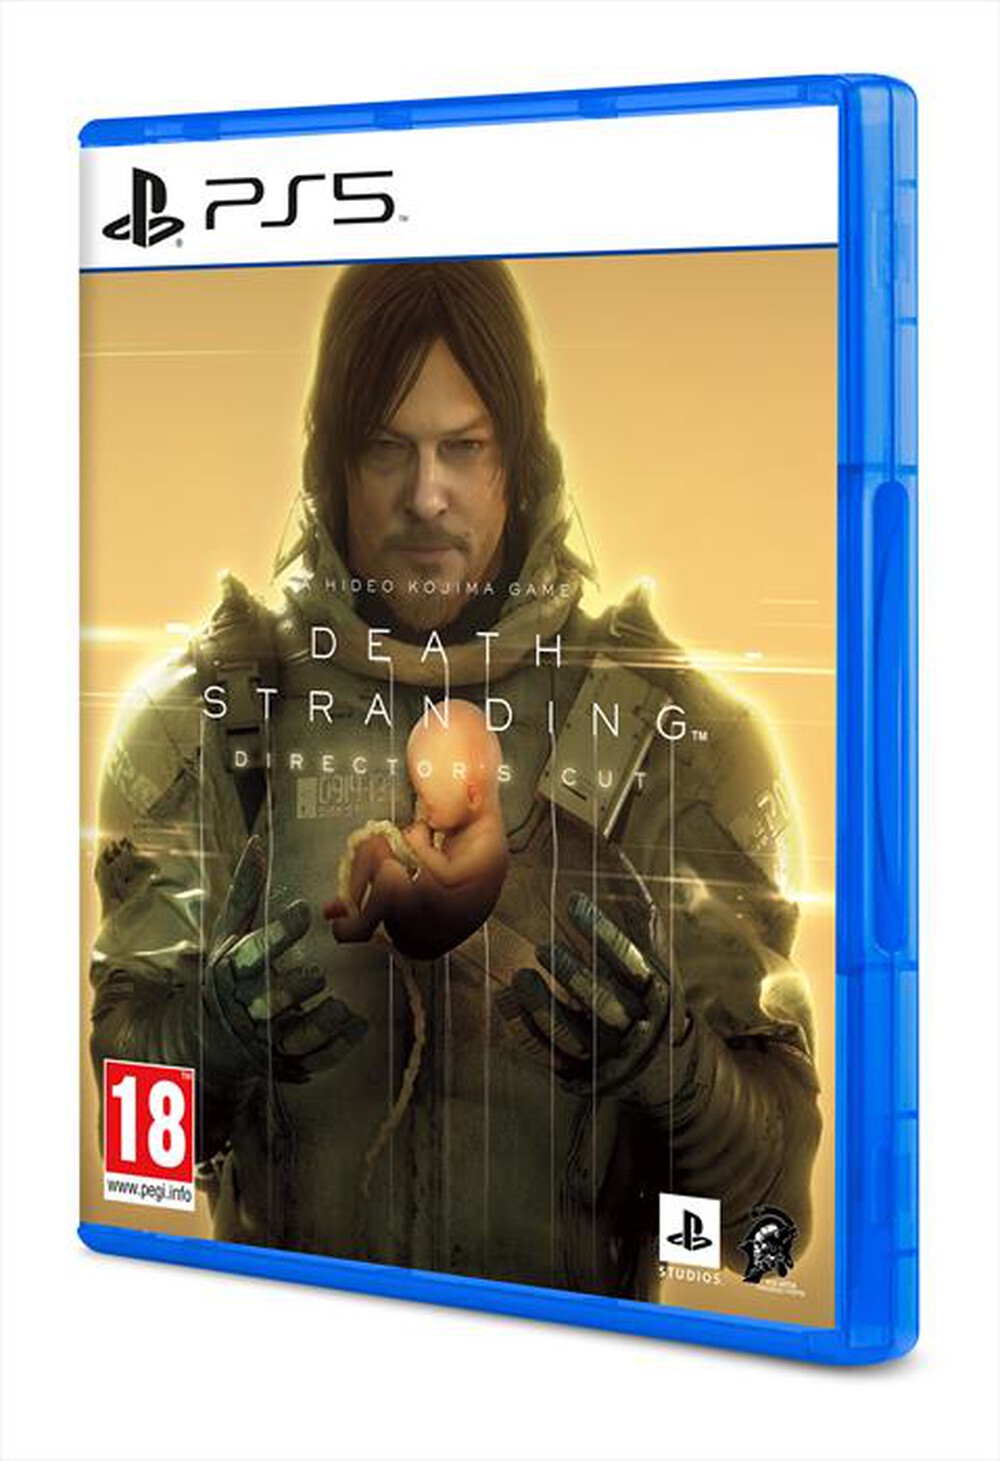 "SONY COMPUTER - DEATH STRANDING DIRECTOR’S CUT PS5"